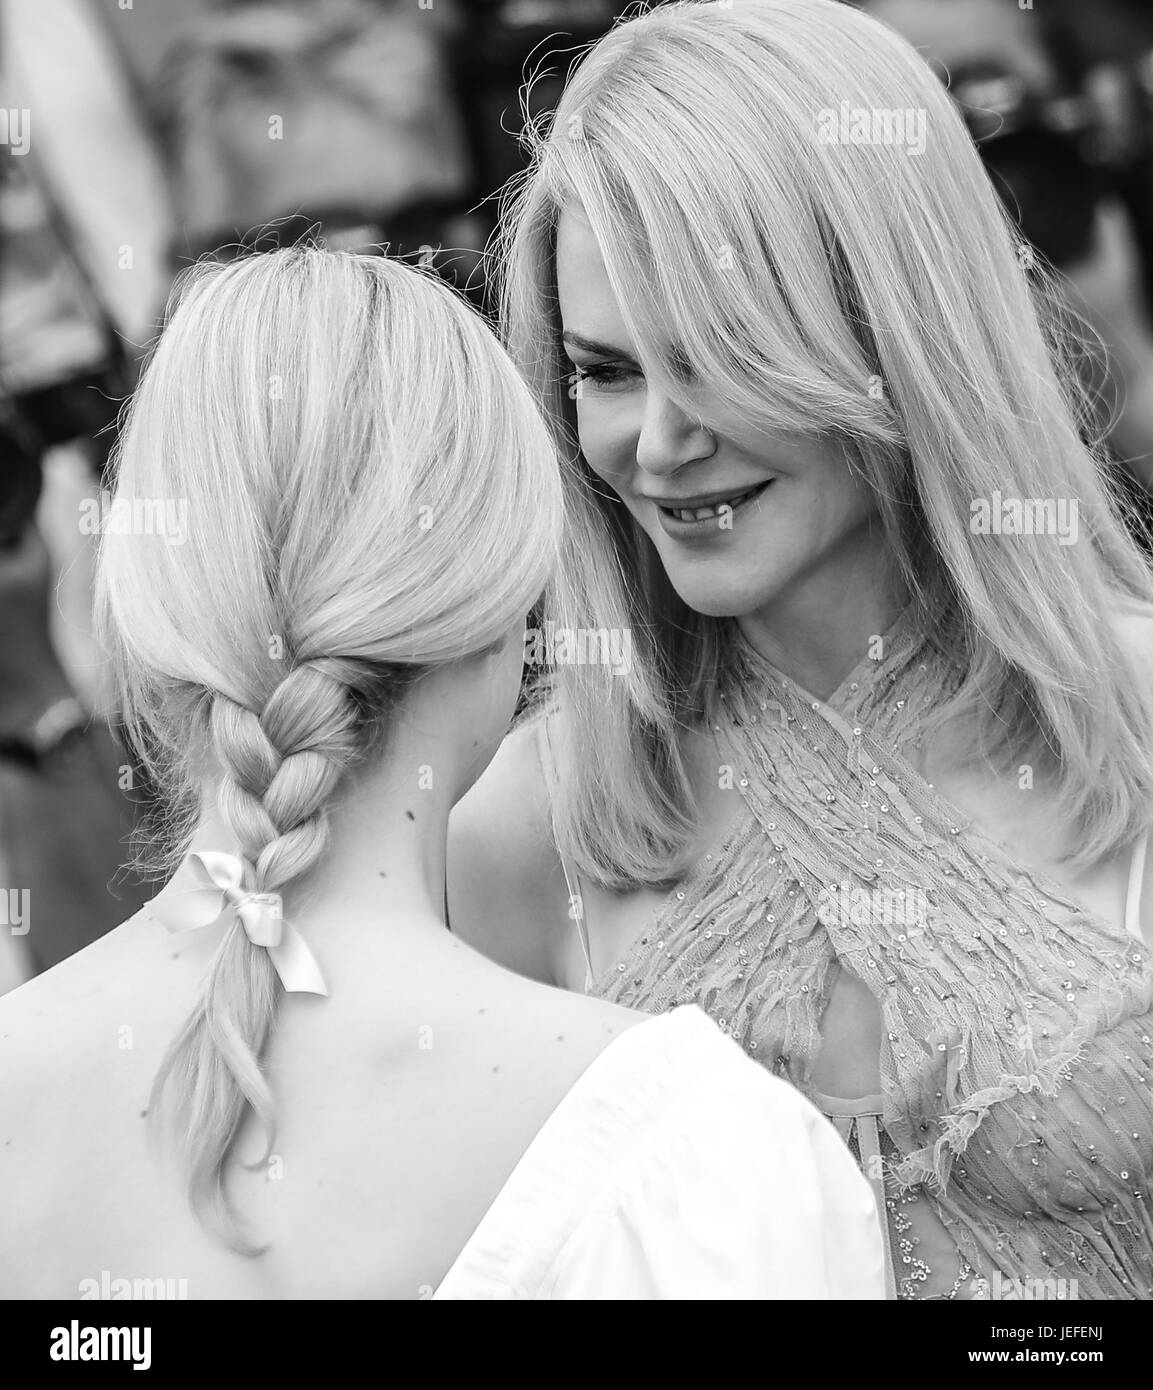 70th Cannes Film Festival - 'The Beguiled' - Photocall  Featuring: Elle Fanning, Nicole Kidman Where: Cannes, France When: 24 May 2017 Credit: John Rainford/WENN.com Stock Photo